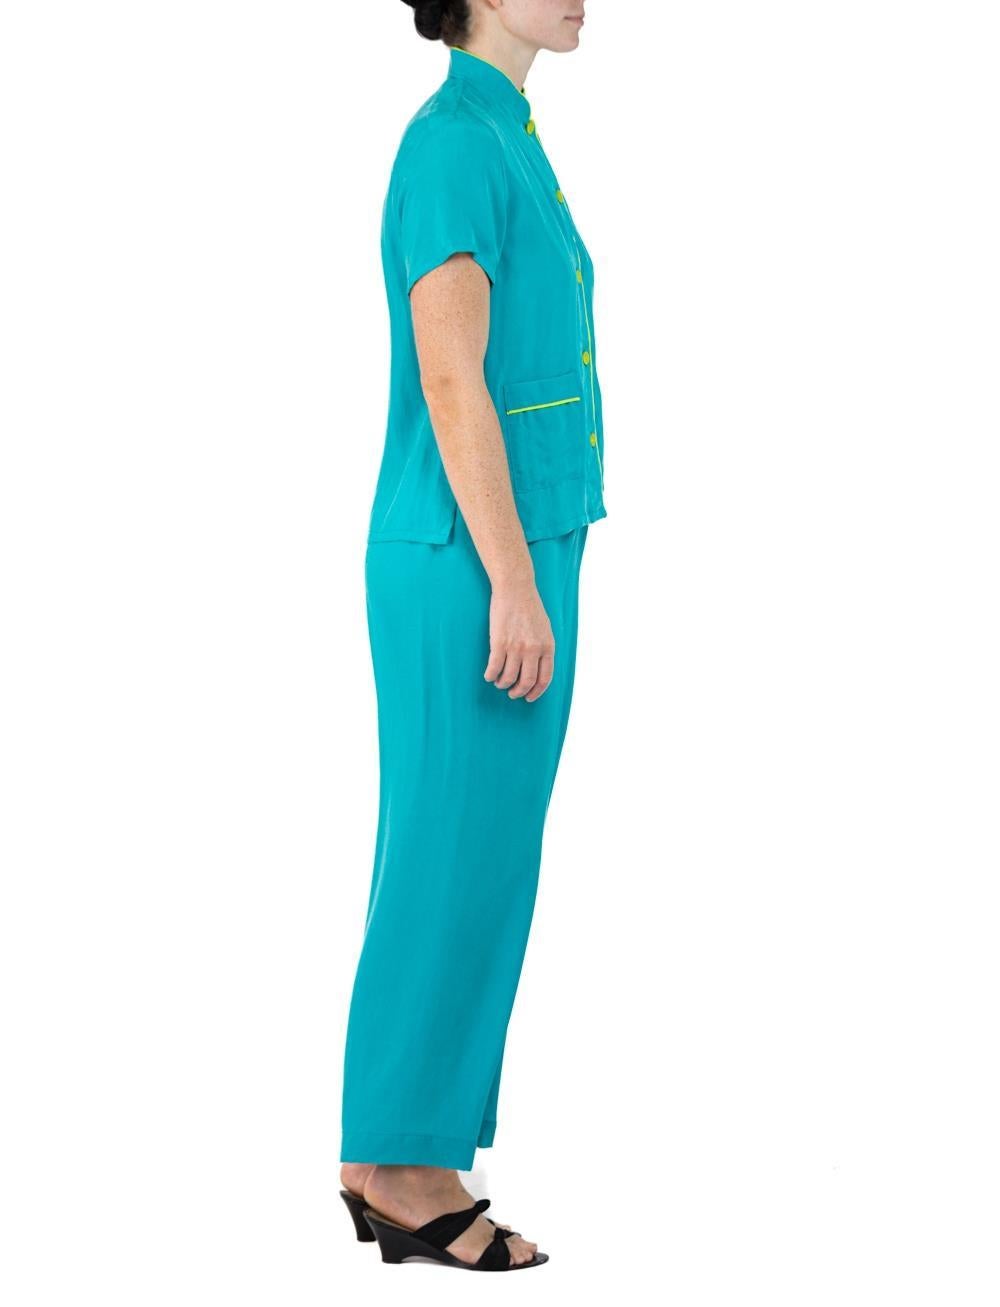 Morphew Collection Teal & Neon Yellow Trim Cold Rayon Bias Pajamas Master Medium In Excellent Condition For Sale In New York, NY